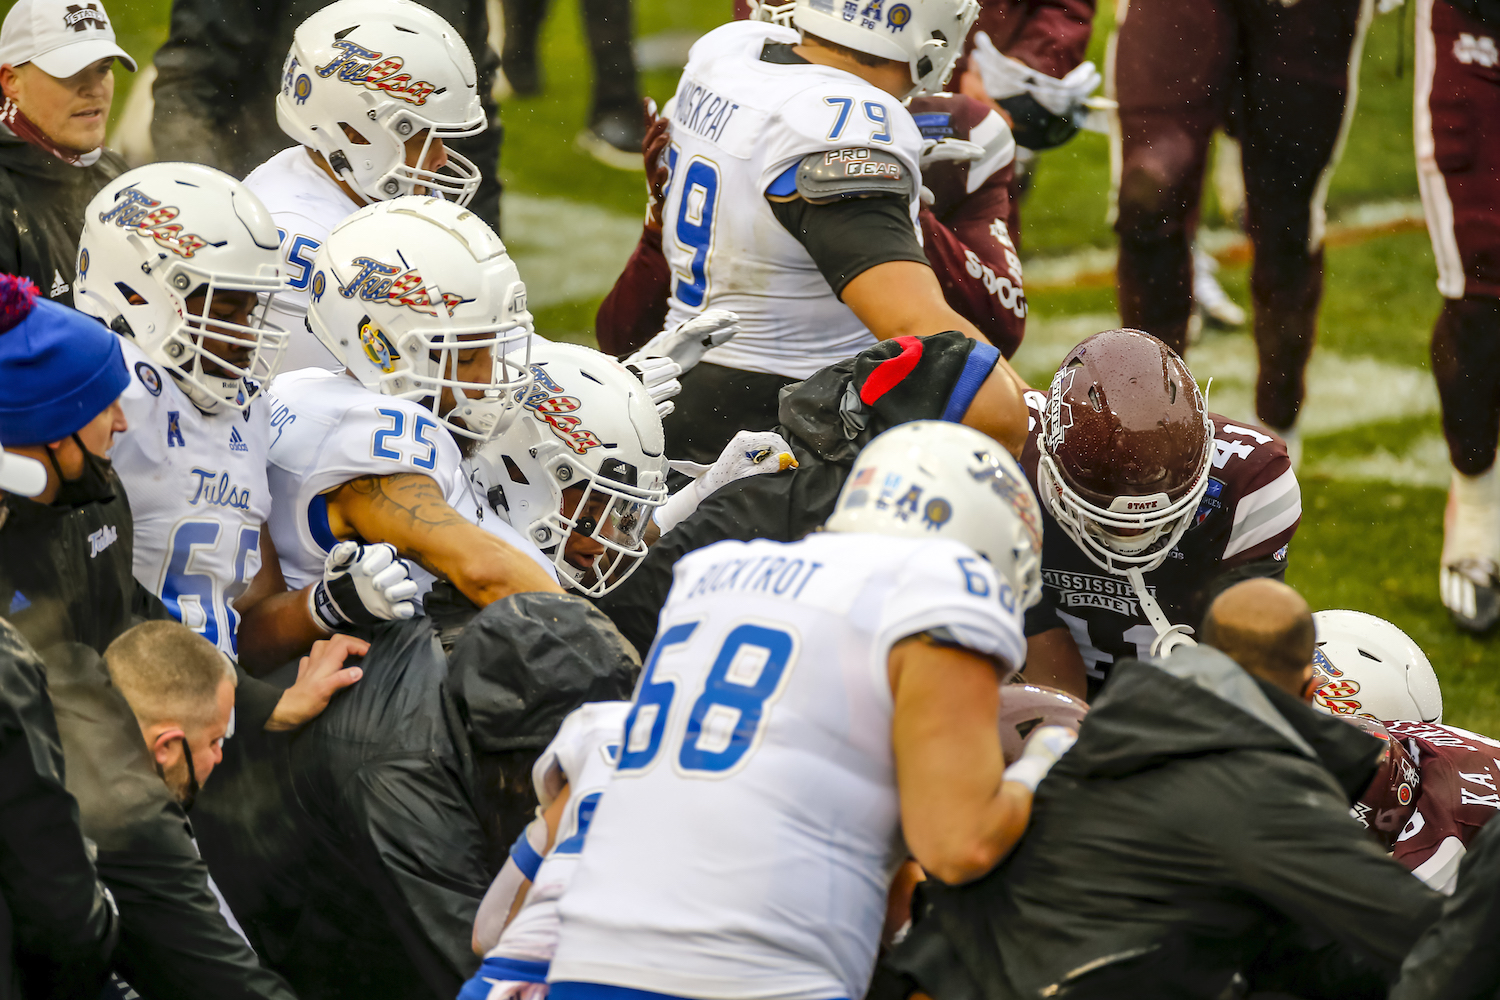 Brawl breaks out at Armed Forces Bowl game between the Tulsa Golden Hurricane and the Mississippi State Bulldogs